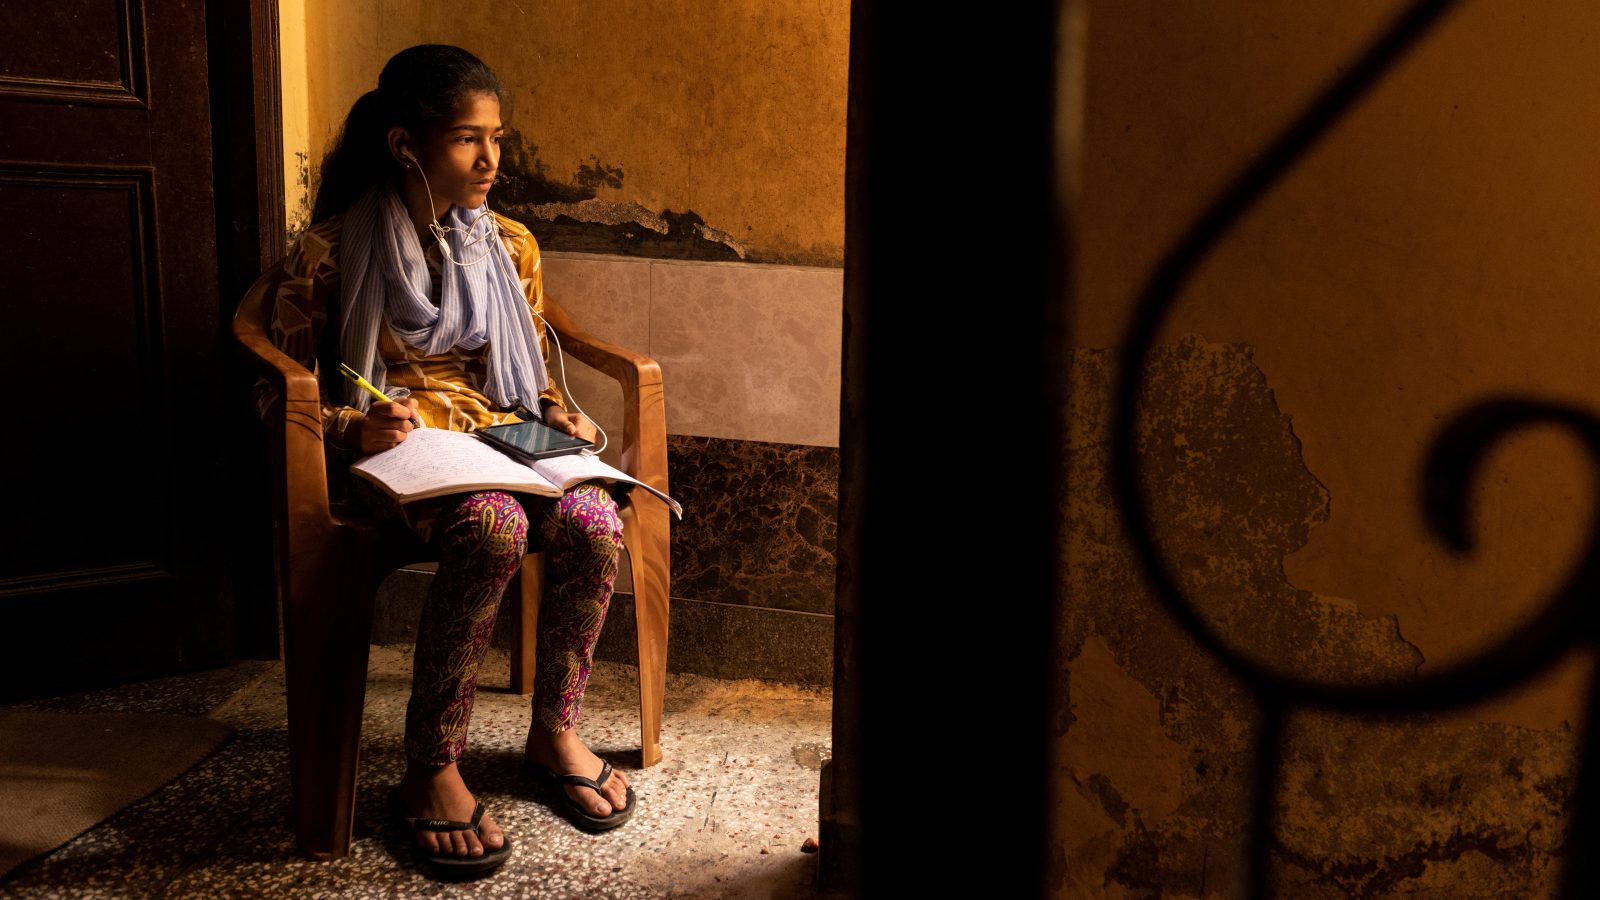 Photo of a girl studying via online classes at her home